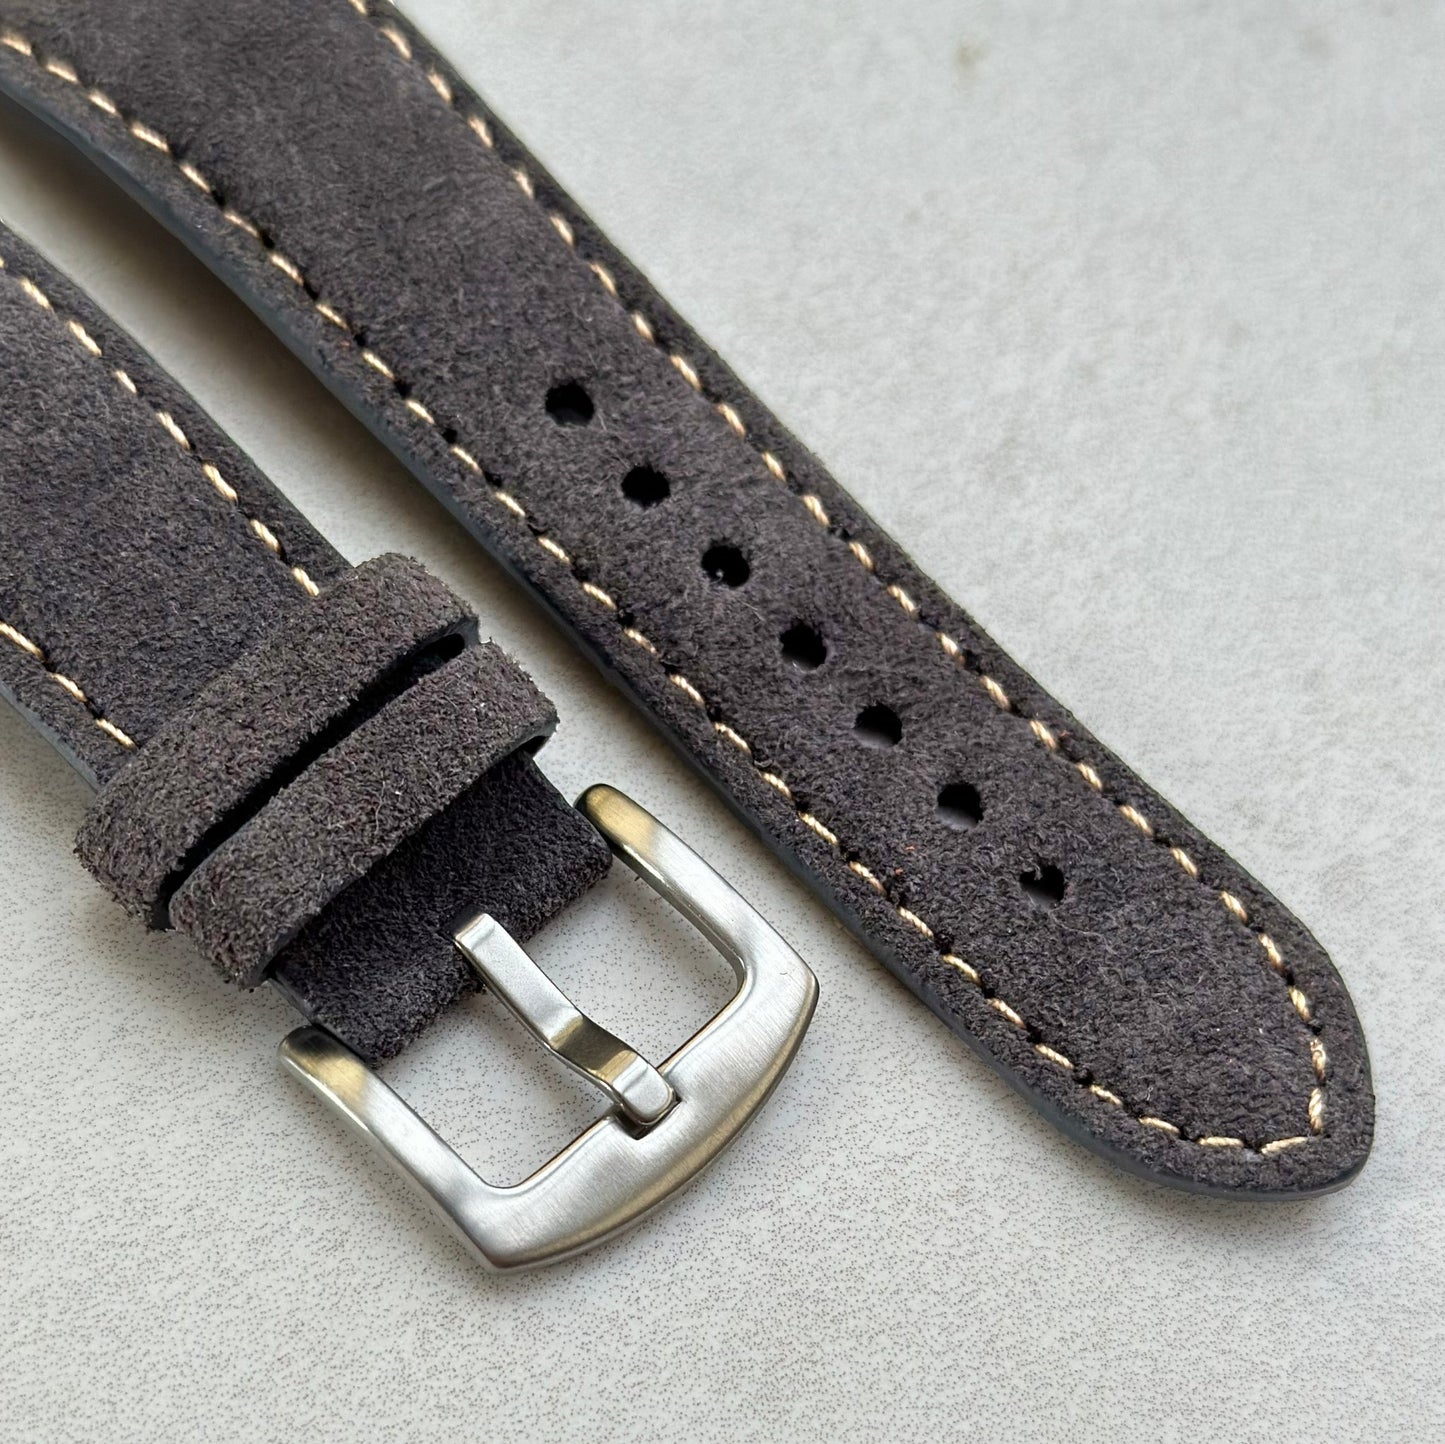 Brushed 316L stainless steel buckle on the Paris gunmetal grey suede watch strap. Contrast ivory stitching. Watch And Strap.